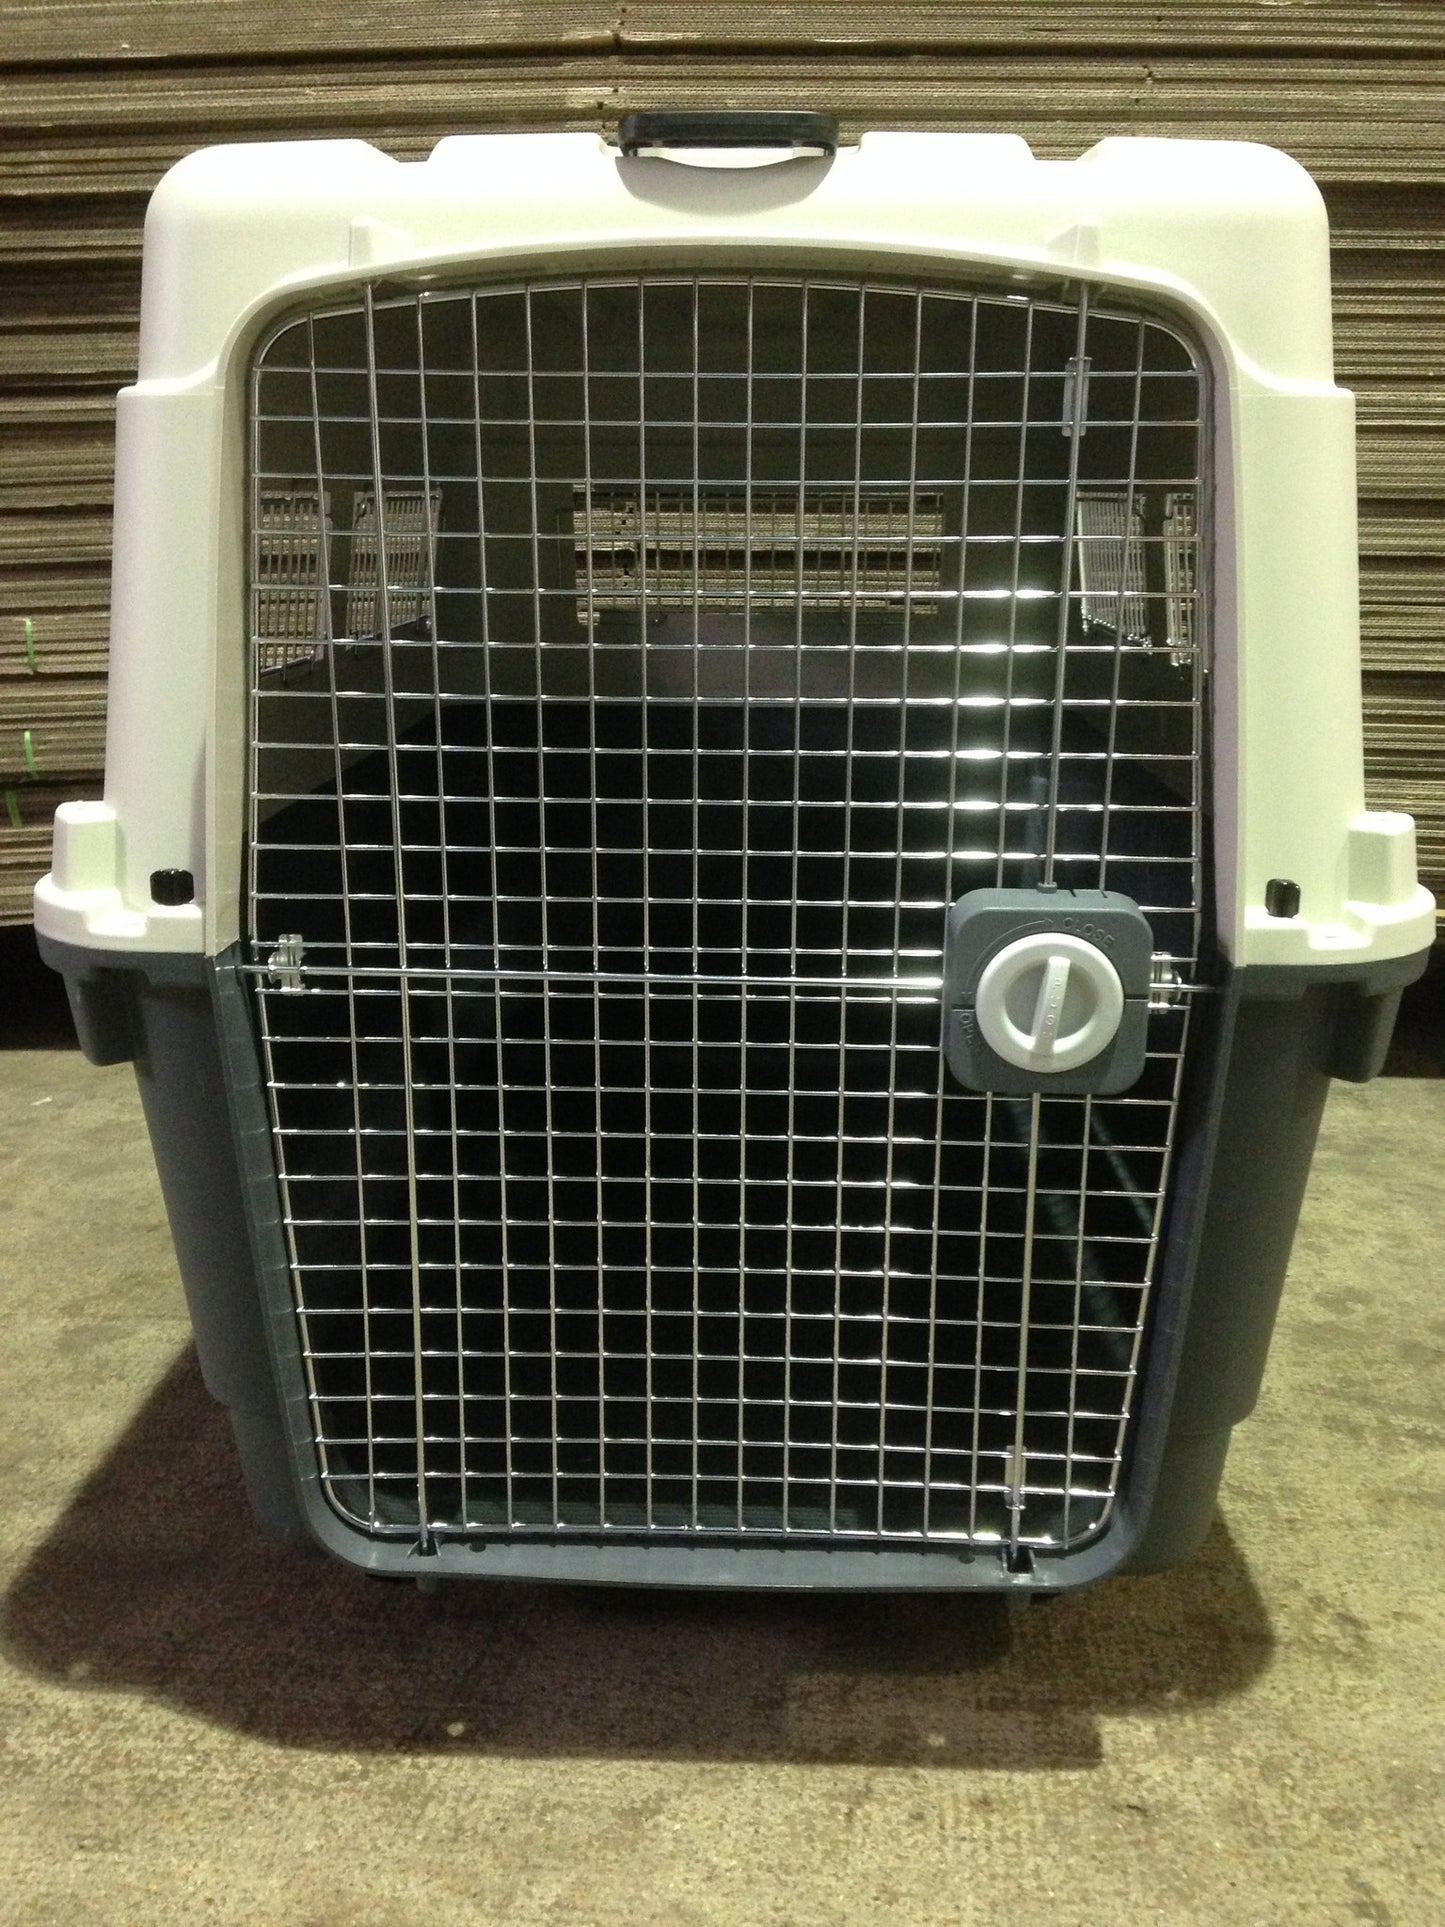 Giant L120 airline approved pet carrier